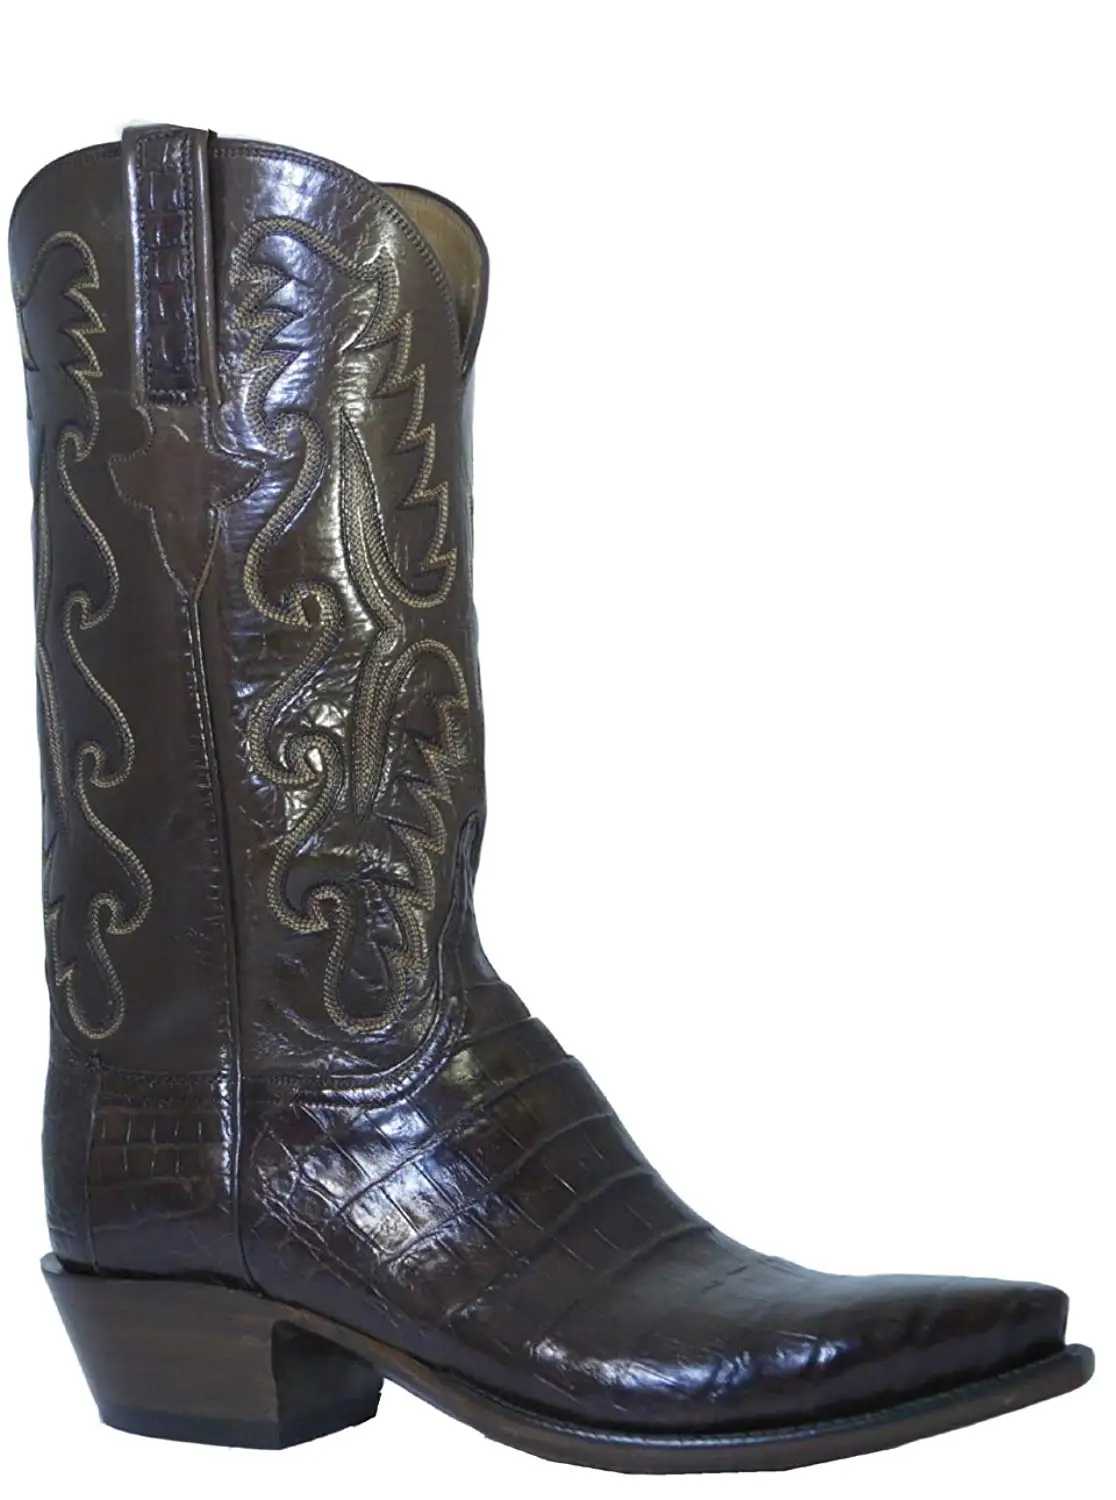 Buy Mens Lucchese Classic Cowboy Boot E2144.54 Sienna Caiman Ultra ...